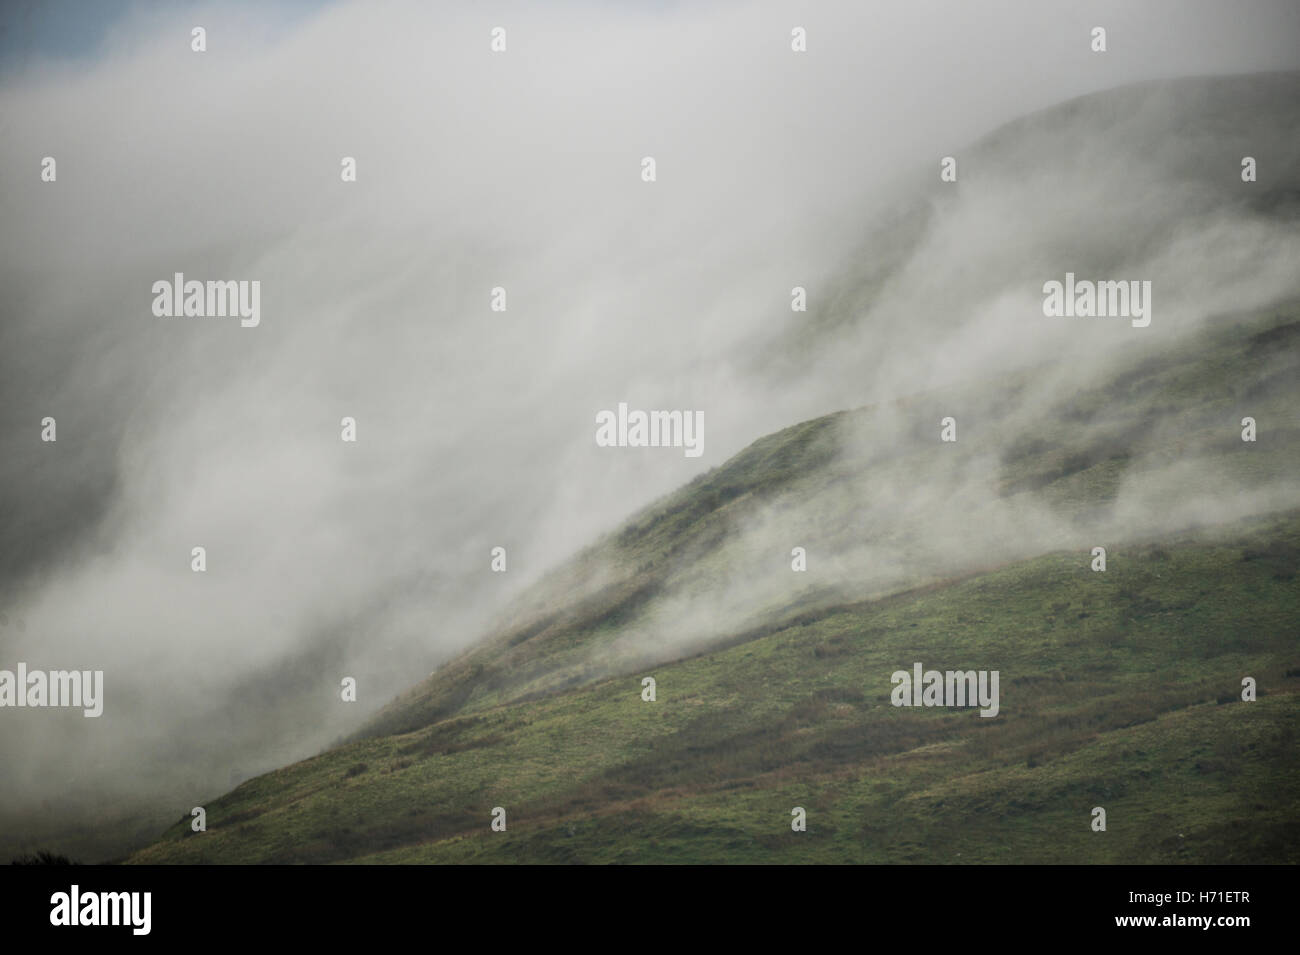 Unusual UK weather: Low mist and fog cascading over the hills near Cadair Idris, Snowdonia National Park, Wales UK Wales UK October 2016 Stock Photo